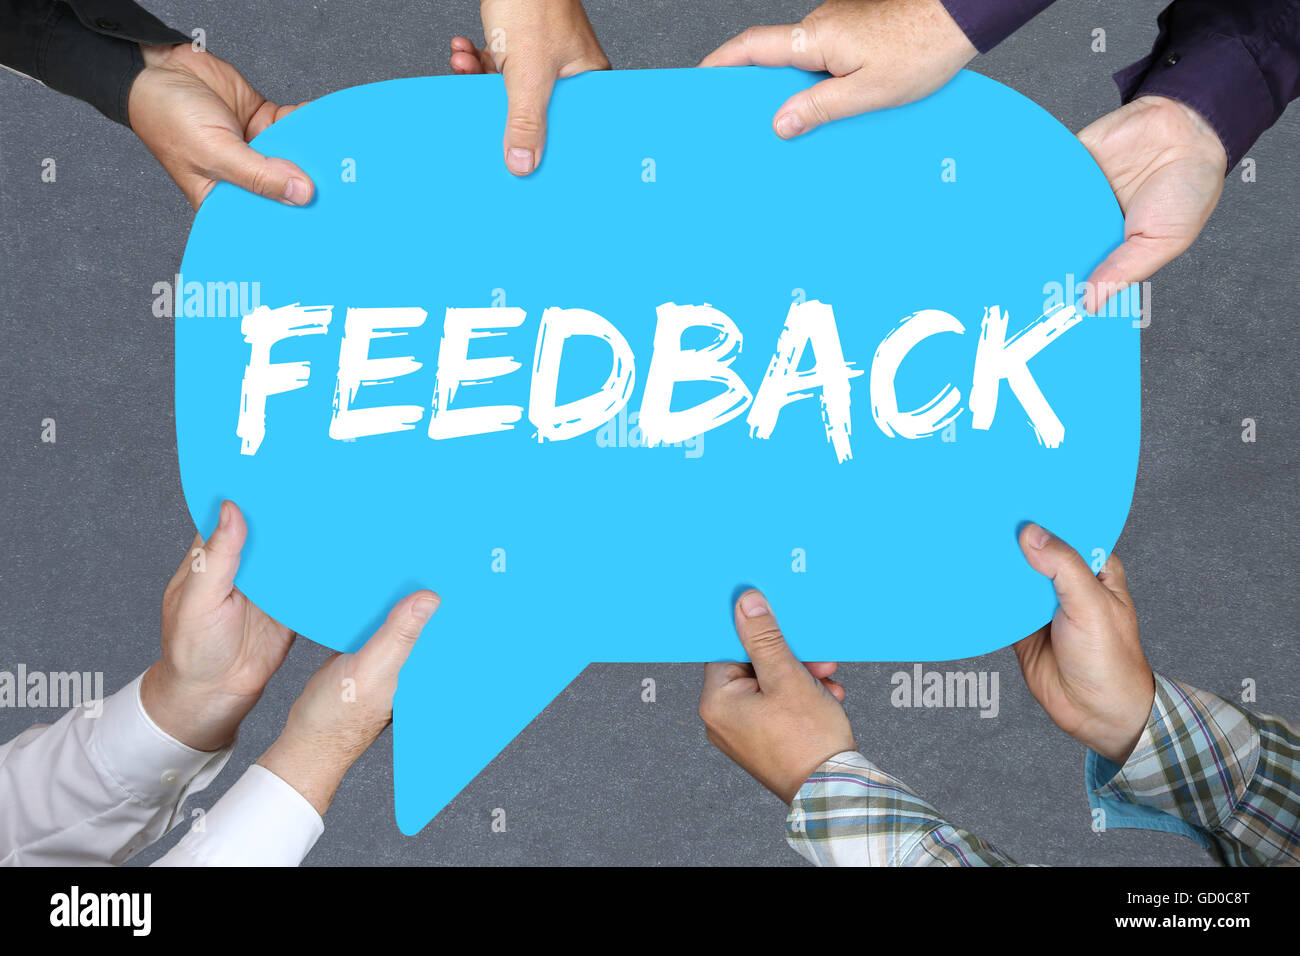 Group of people holding with hands the word feedback contact customer service opinion survey business concept review Stock Photo